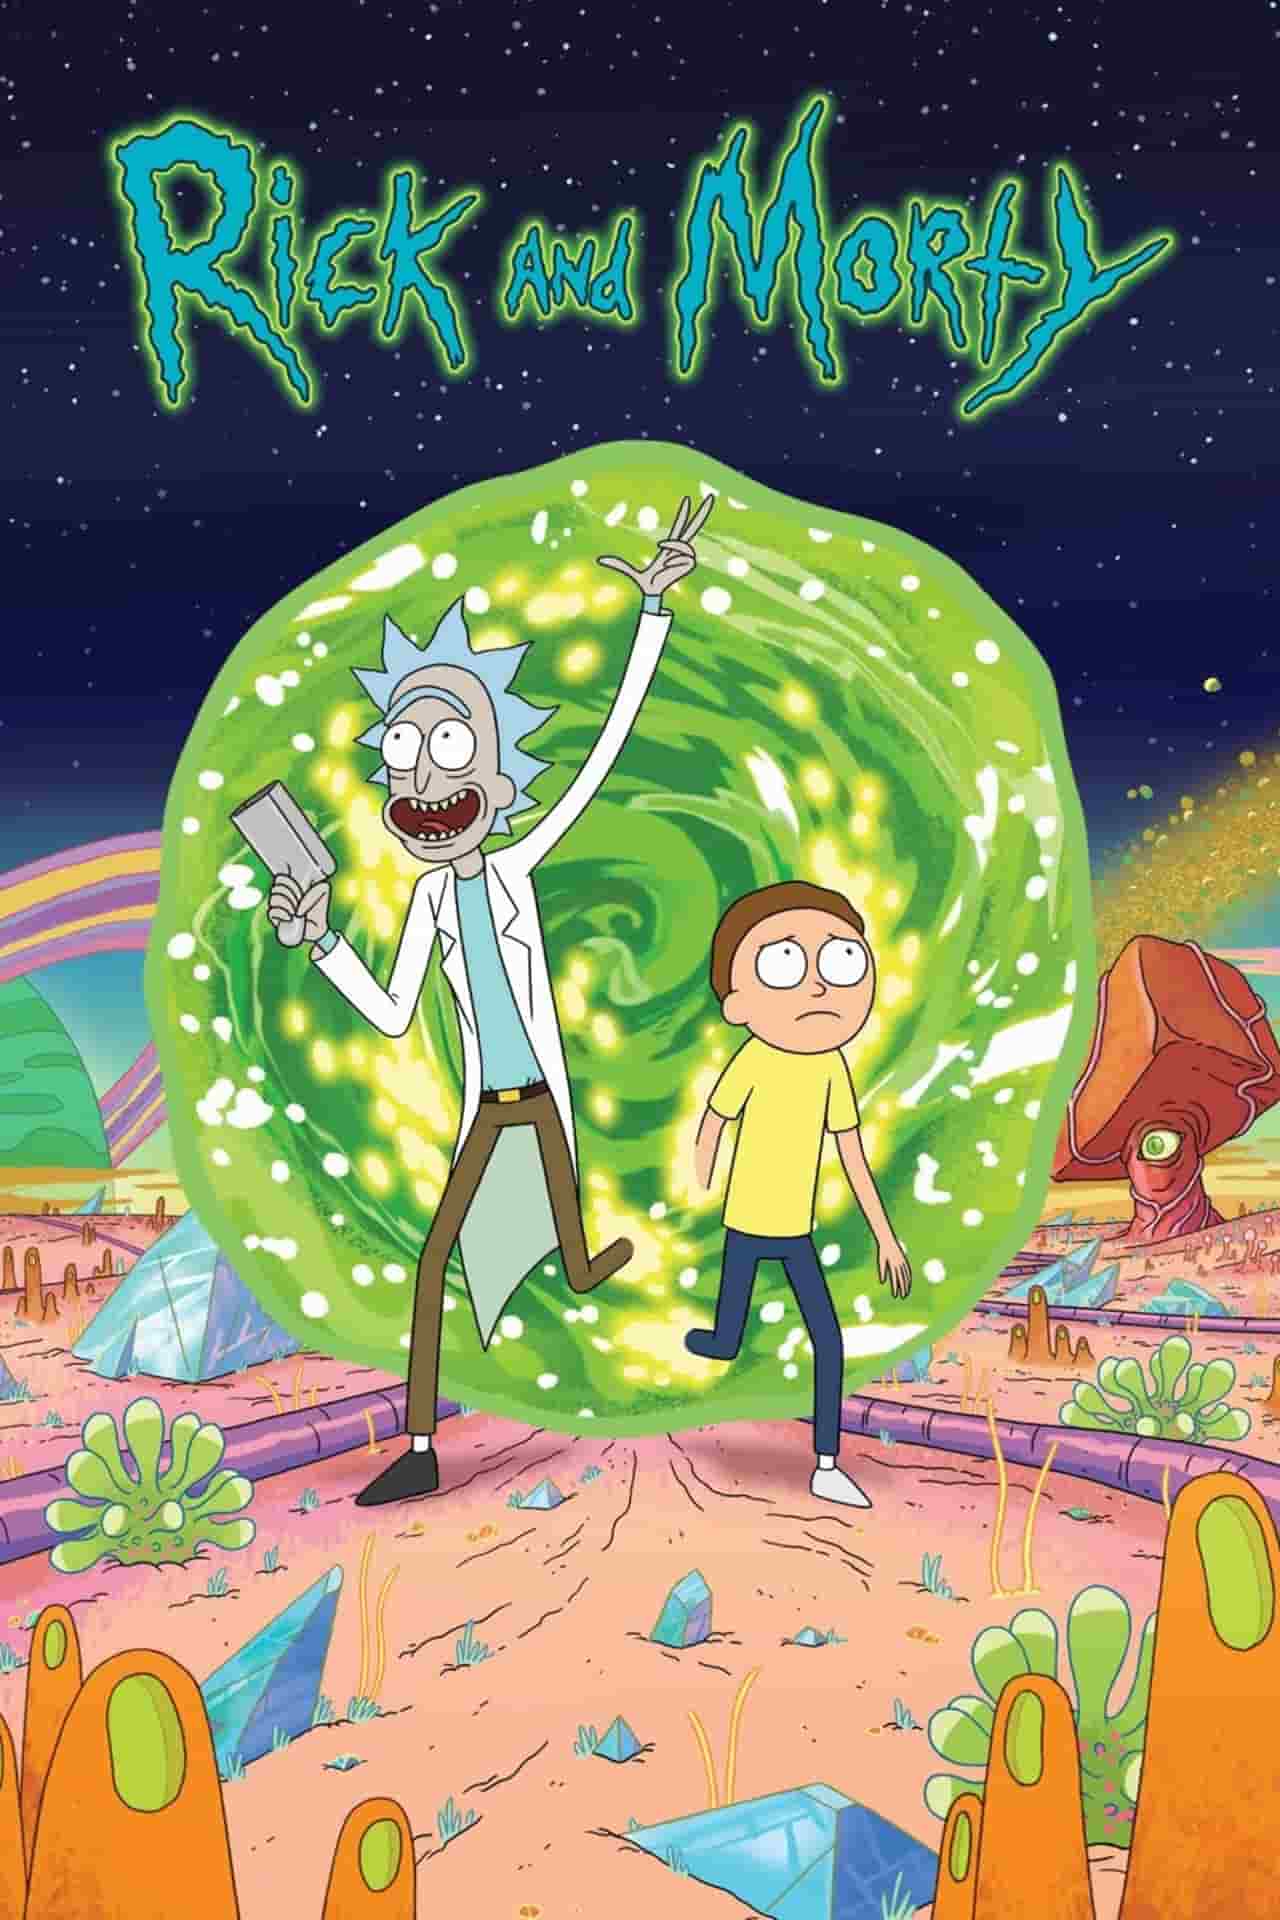 Coco, Rick and Morty coloring pages: Before exploring with your feet, let’s explore the world with coloring pages